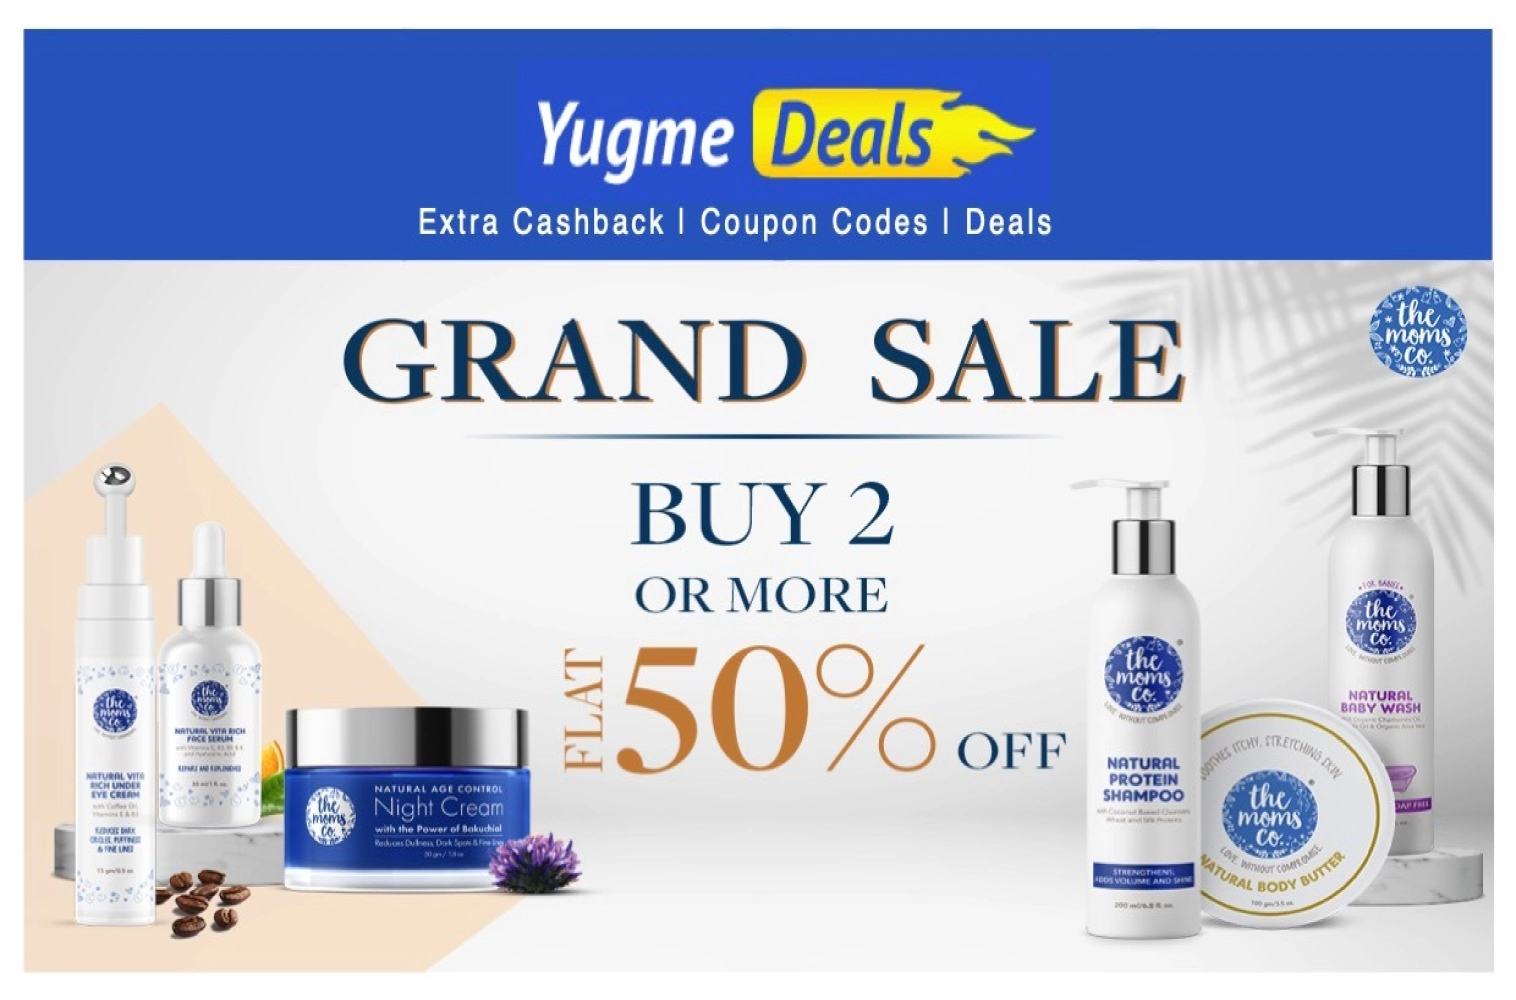 THE MOMS CO GRAND SALE BUY 2 OR MORE GET FLAT 50% OFF